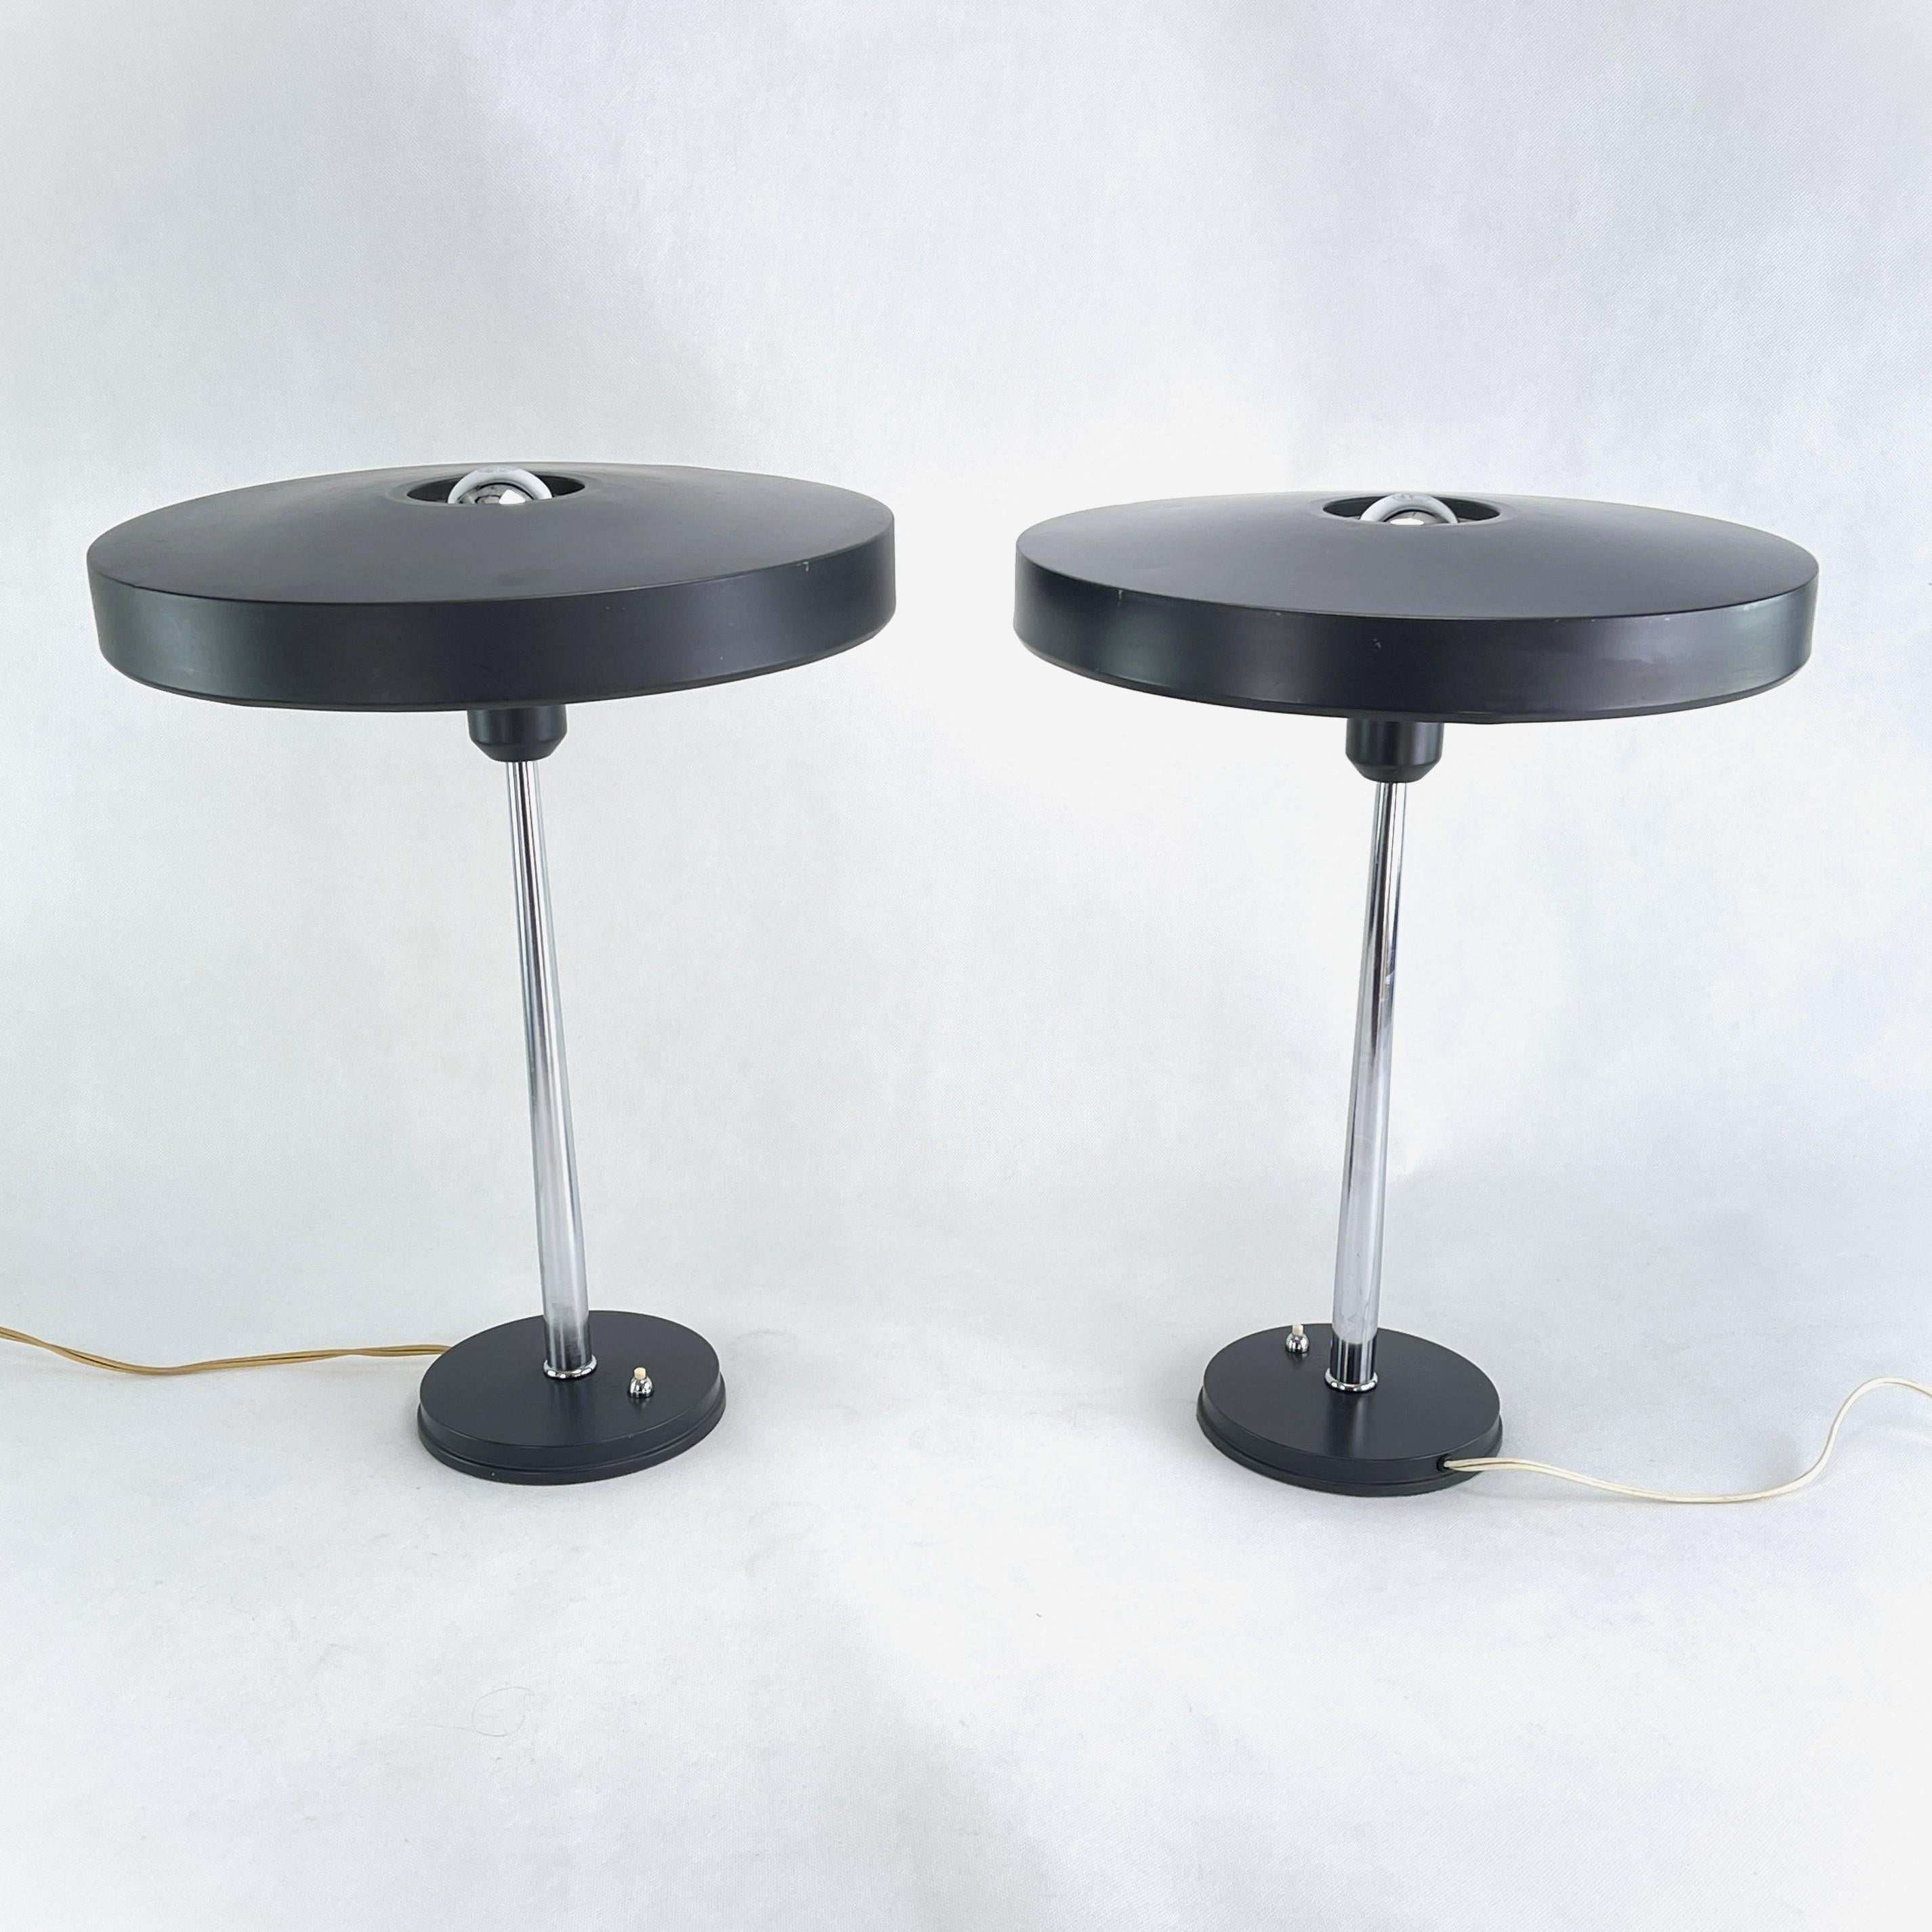 2 Vintage Table Lamp Junior from Philips - 1950s

These lamps are a real piece of vintage design history and testify to the creative brilliance of the renowned designer Louis Kalff.

He was the artistic director of the Philips company in